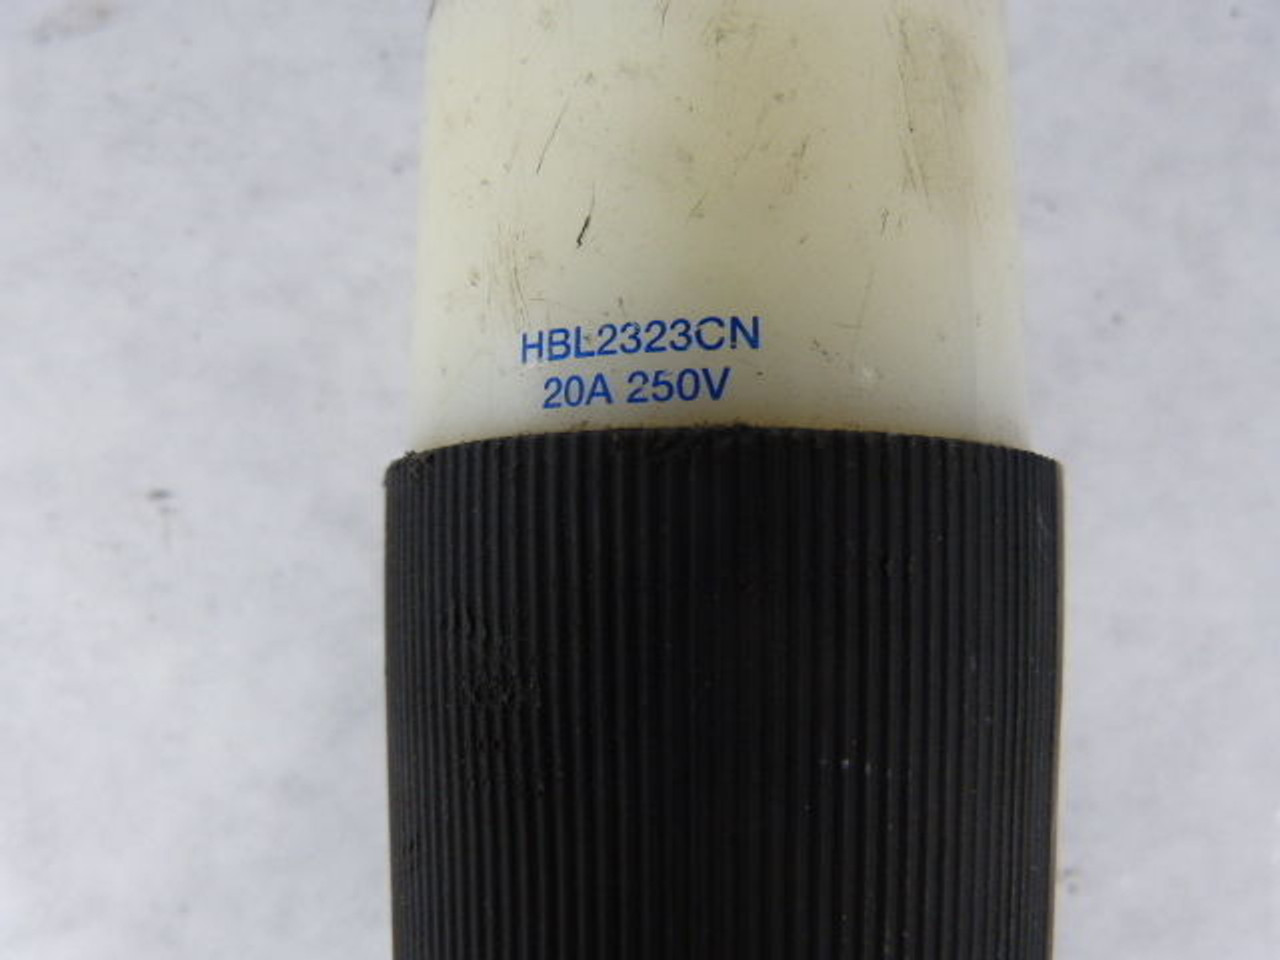 Hubbell HBL2323CN Twist Lock Receptacle 20A 250V USED